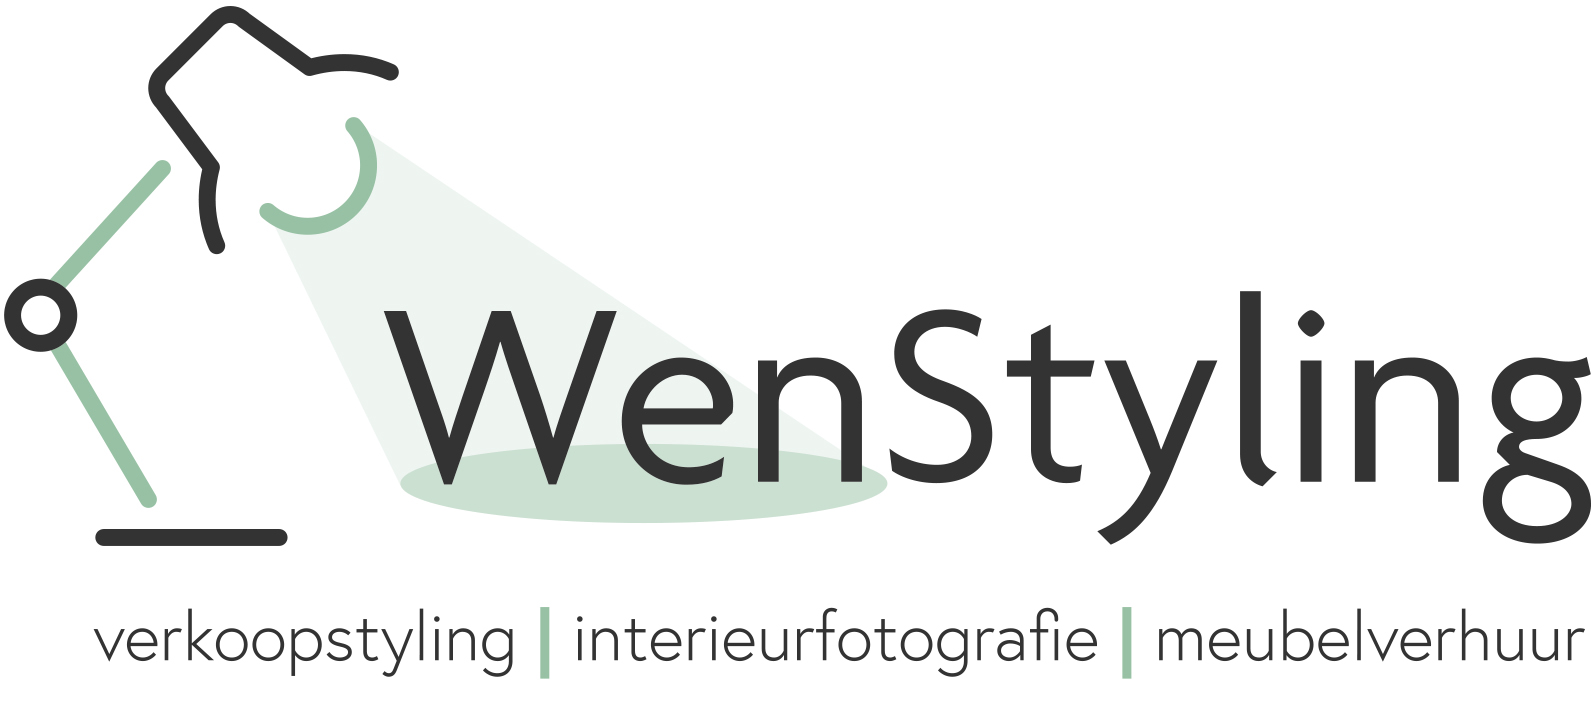 Https://wenstyling.nl